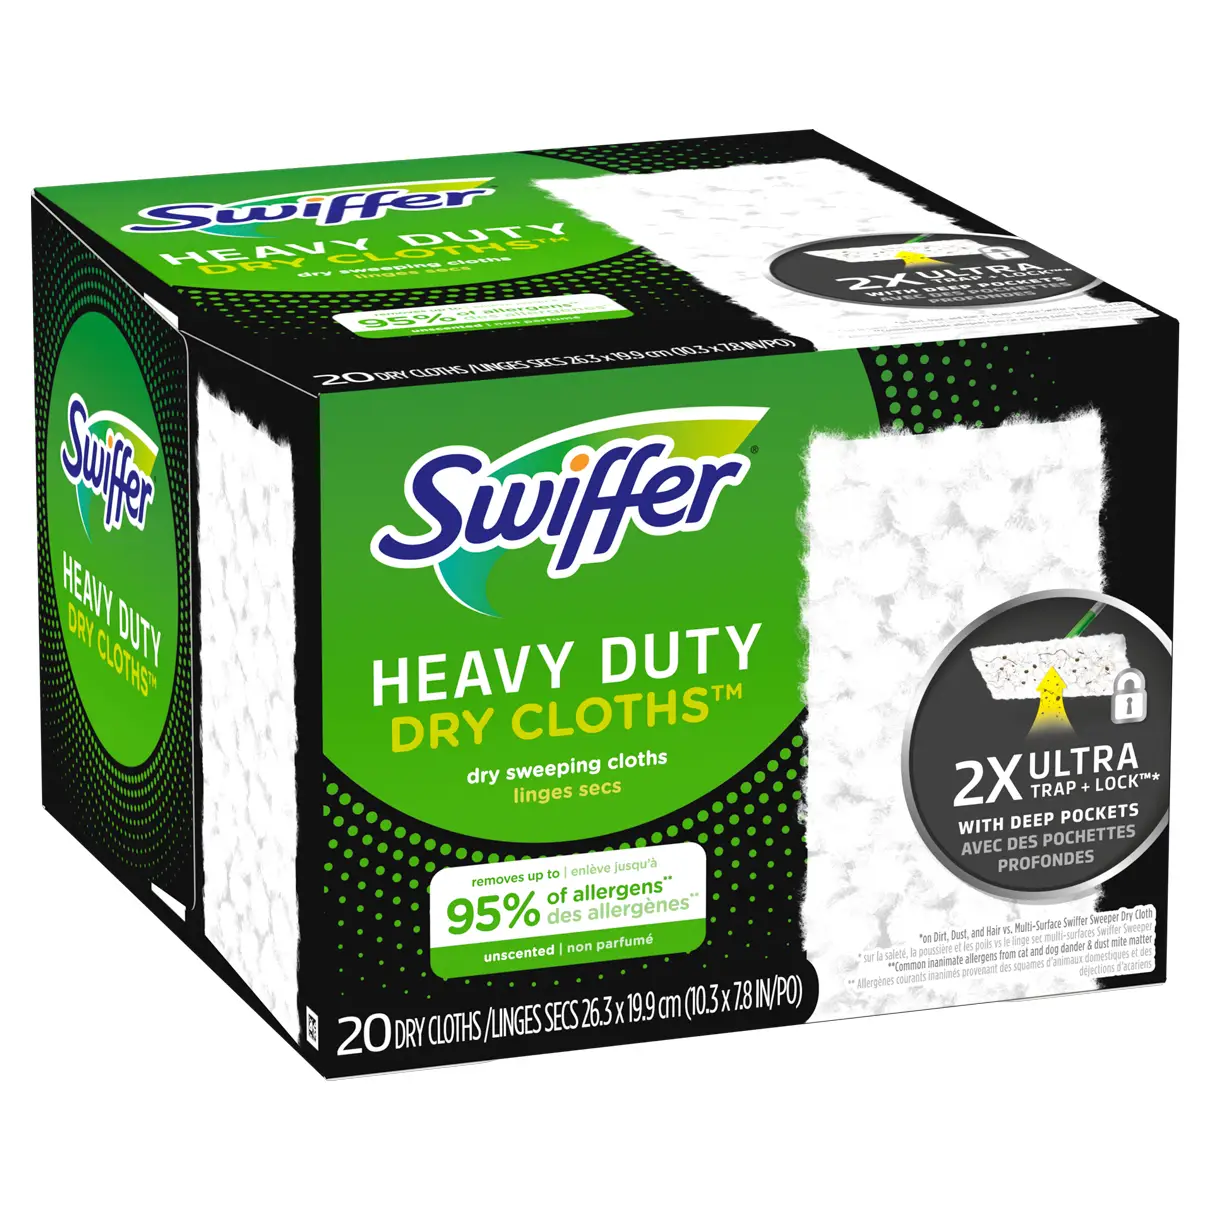 Shop All Swiffer Products